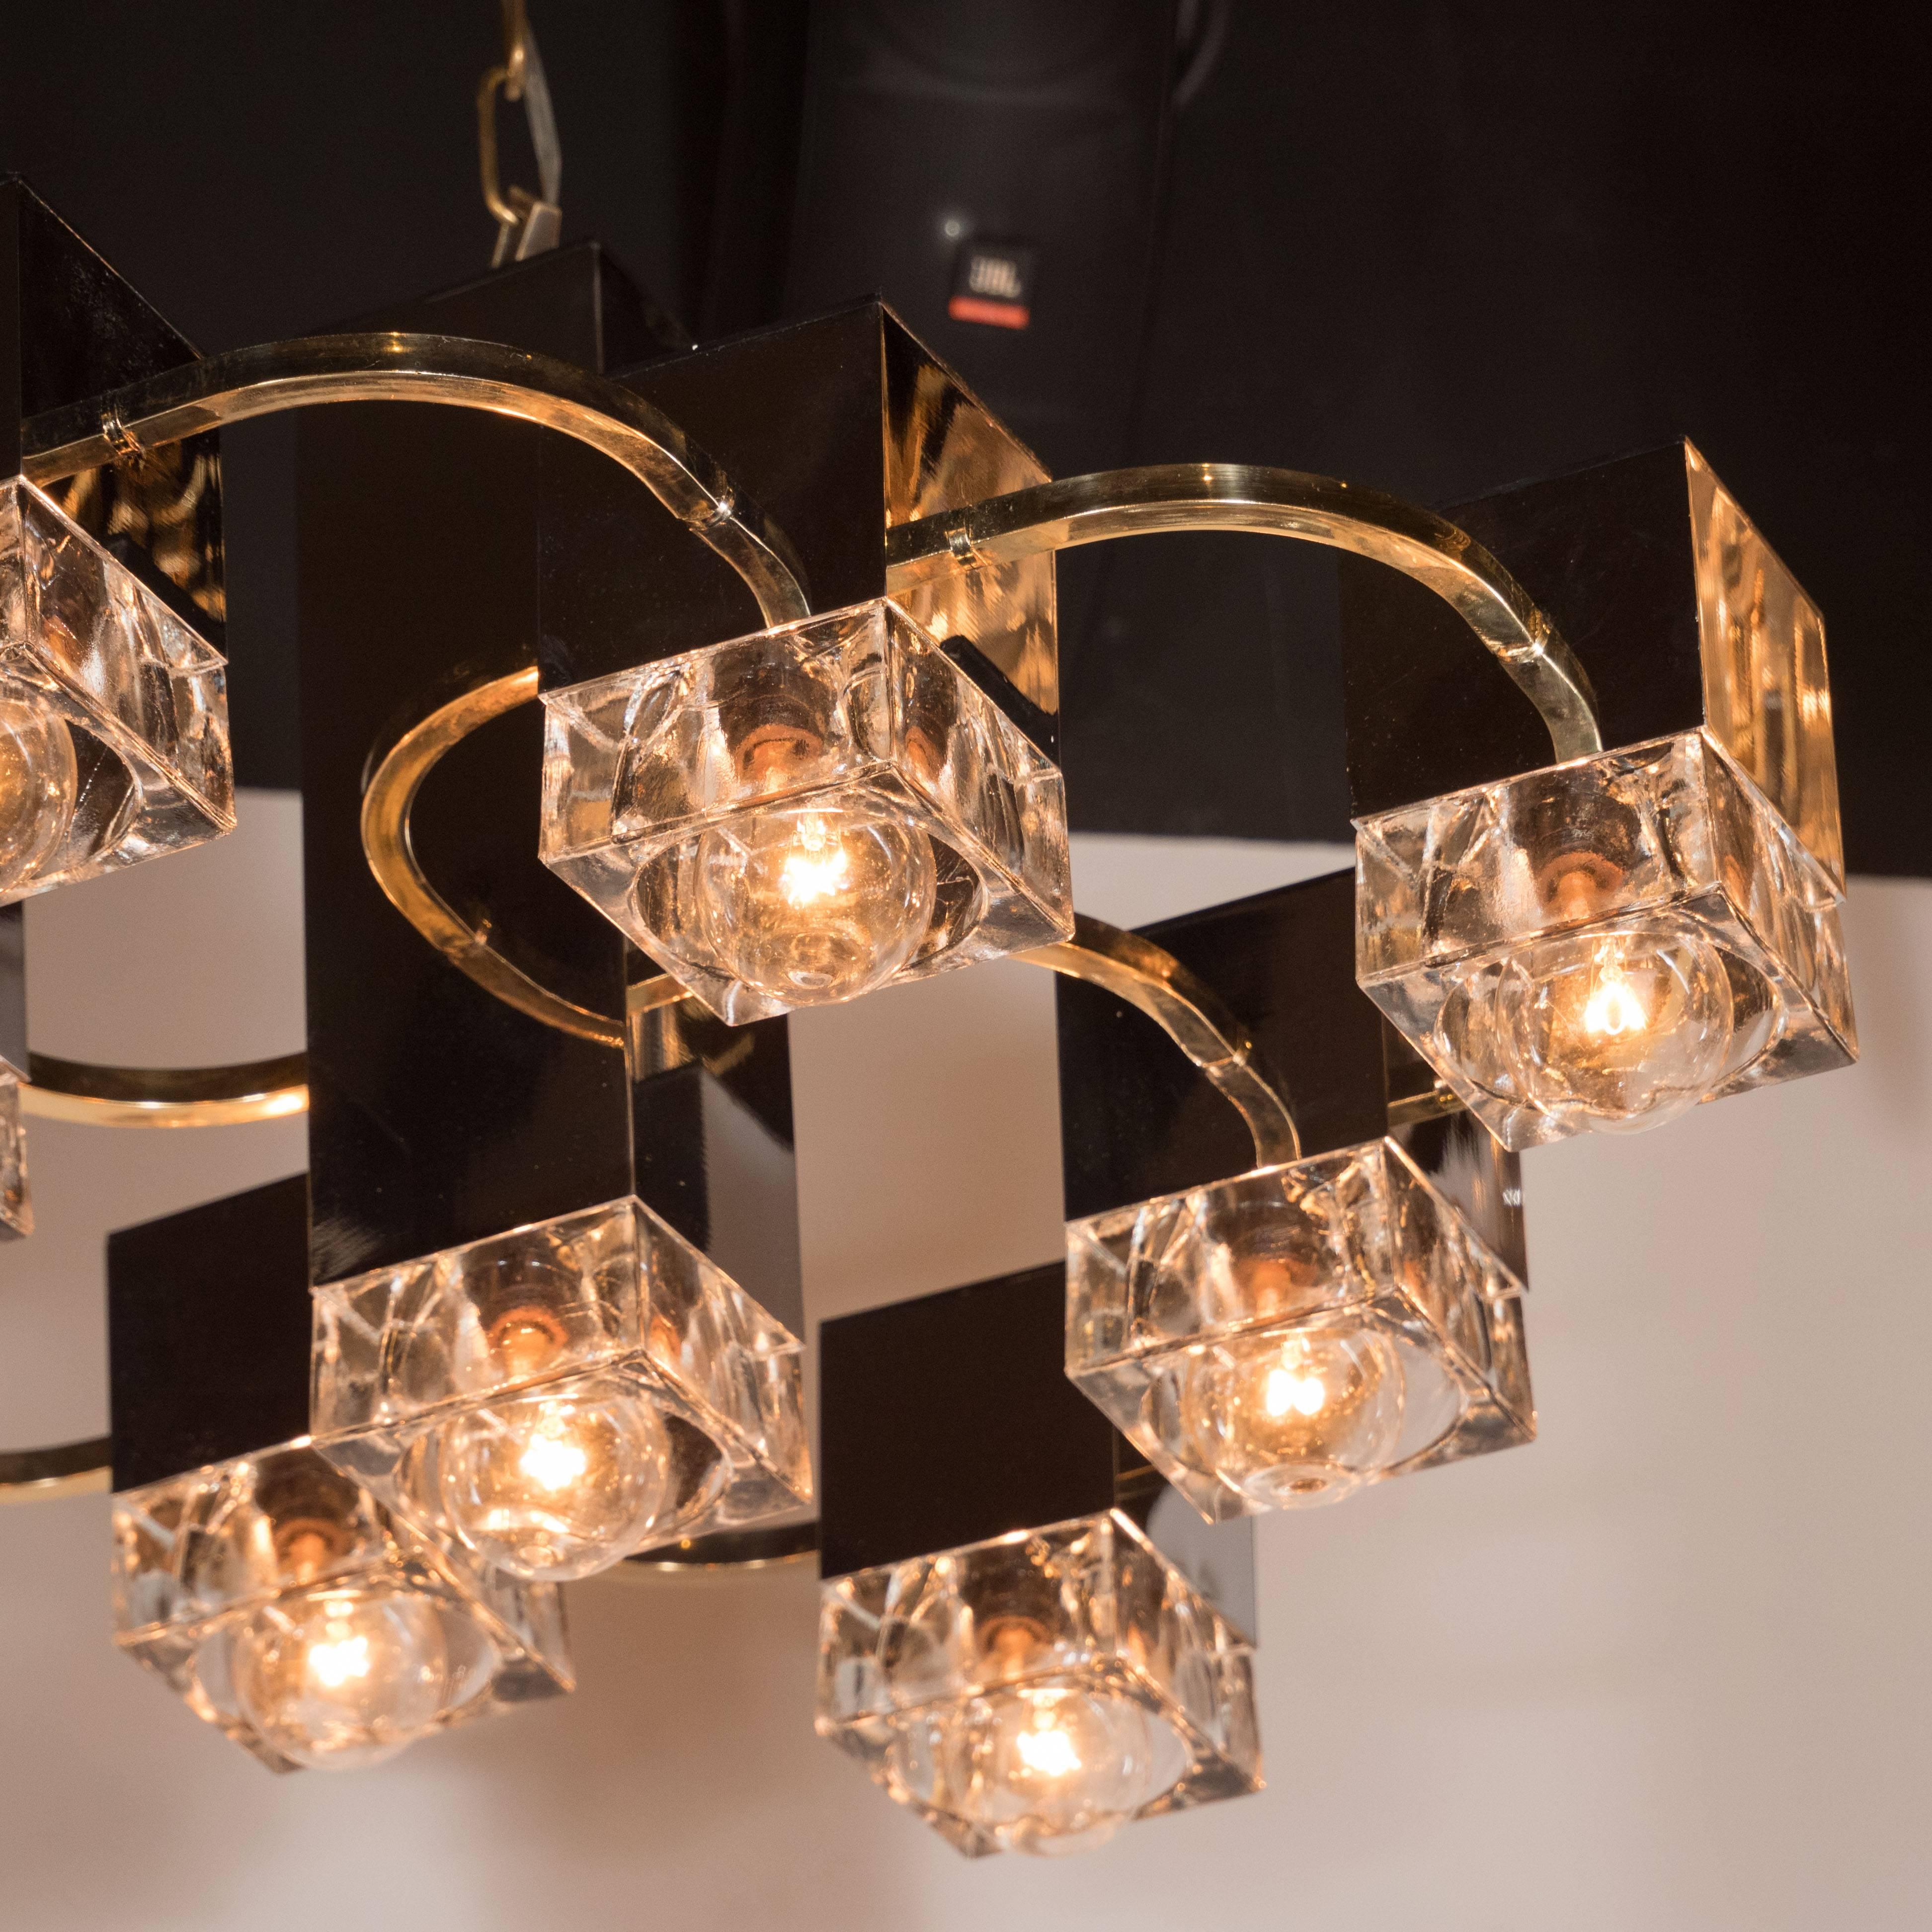 Late 20th Century Mid-Century Sciolari Chandelier with Waterglass Cubes, Chrome and Brass